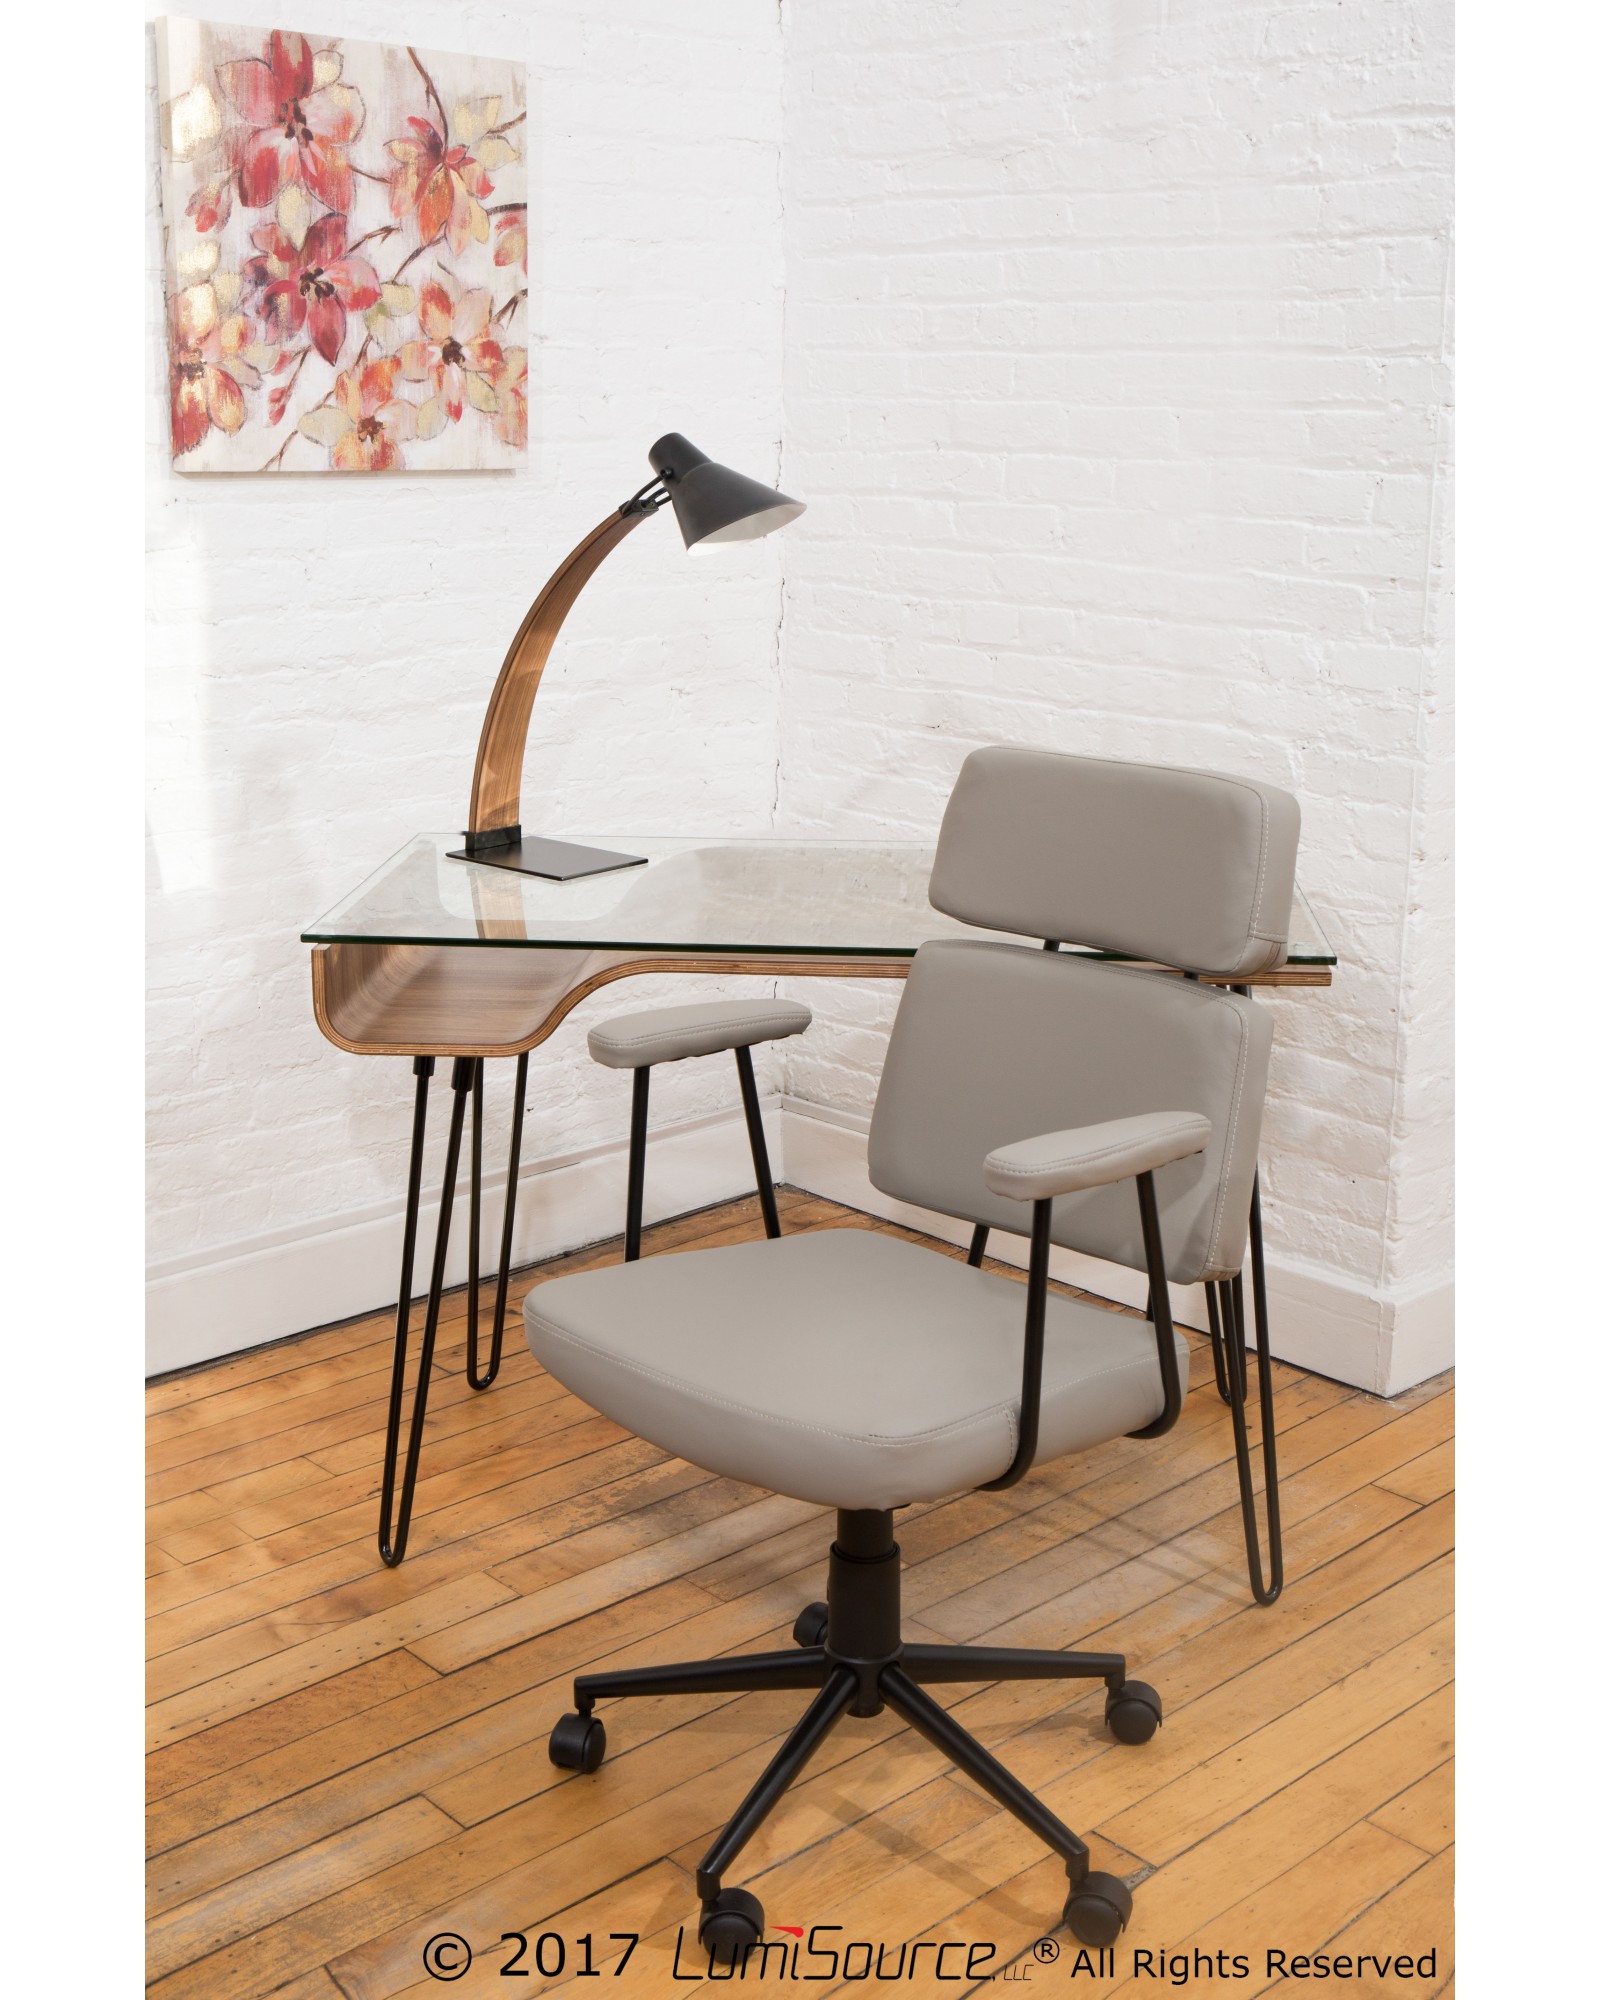 Sigmund Contemporary Adjustable Office Chair in Grey Faux Leather